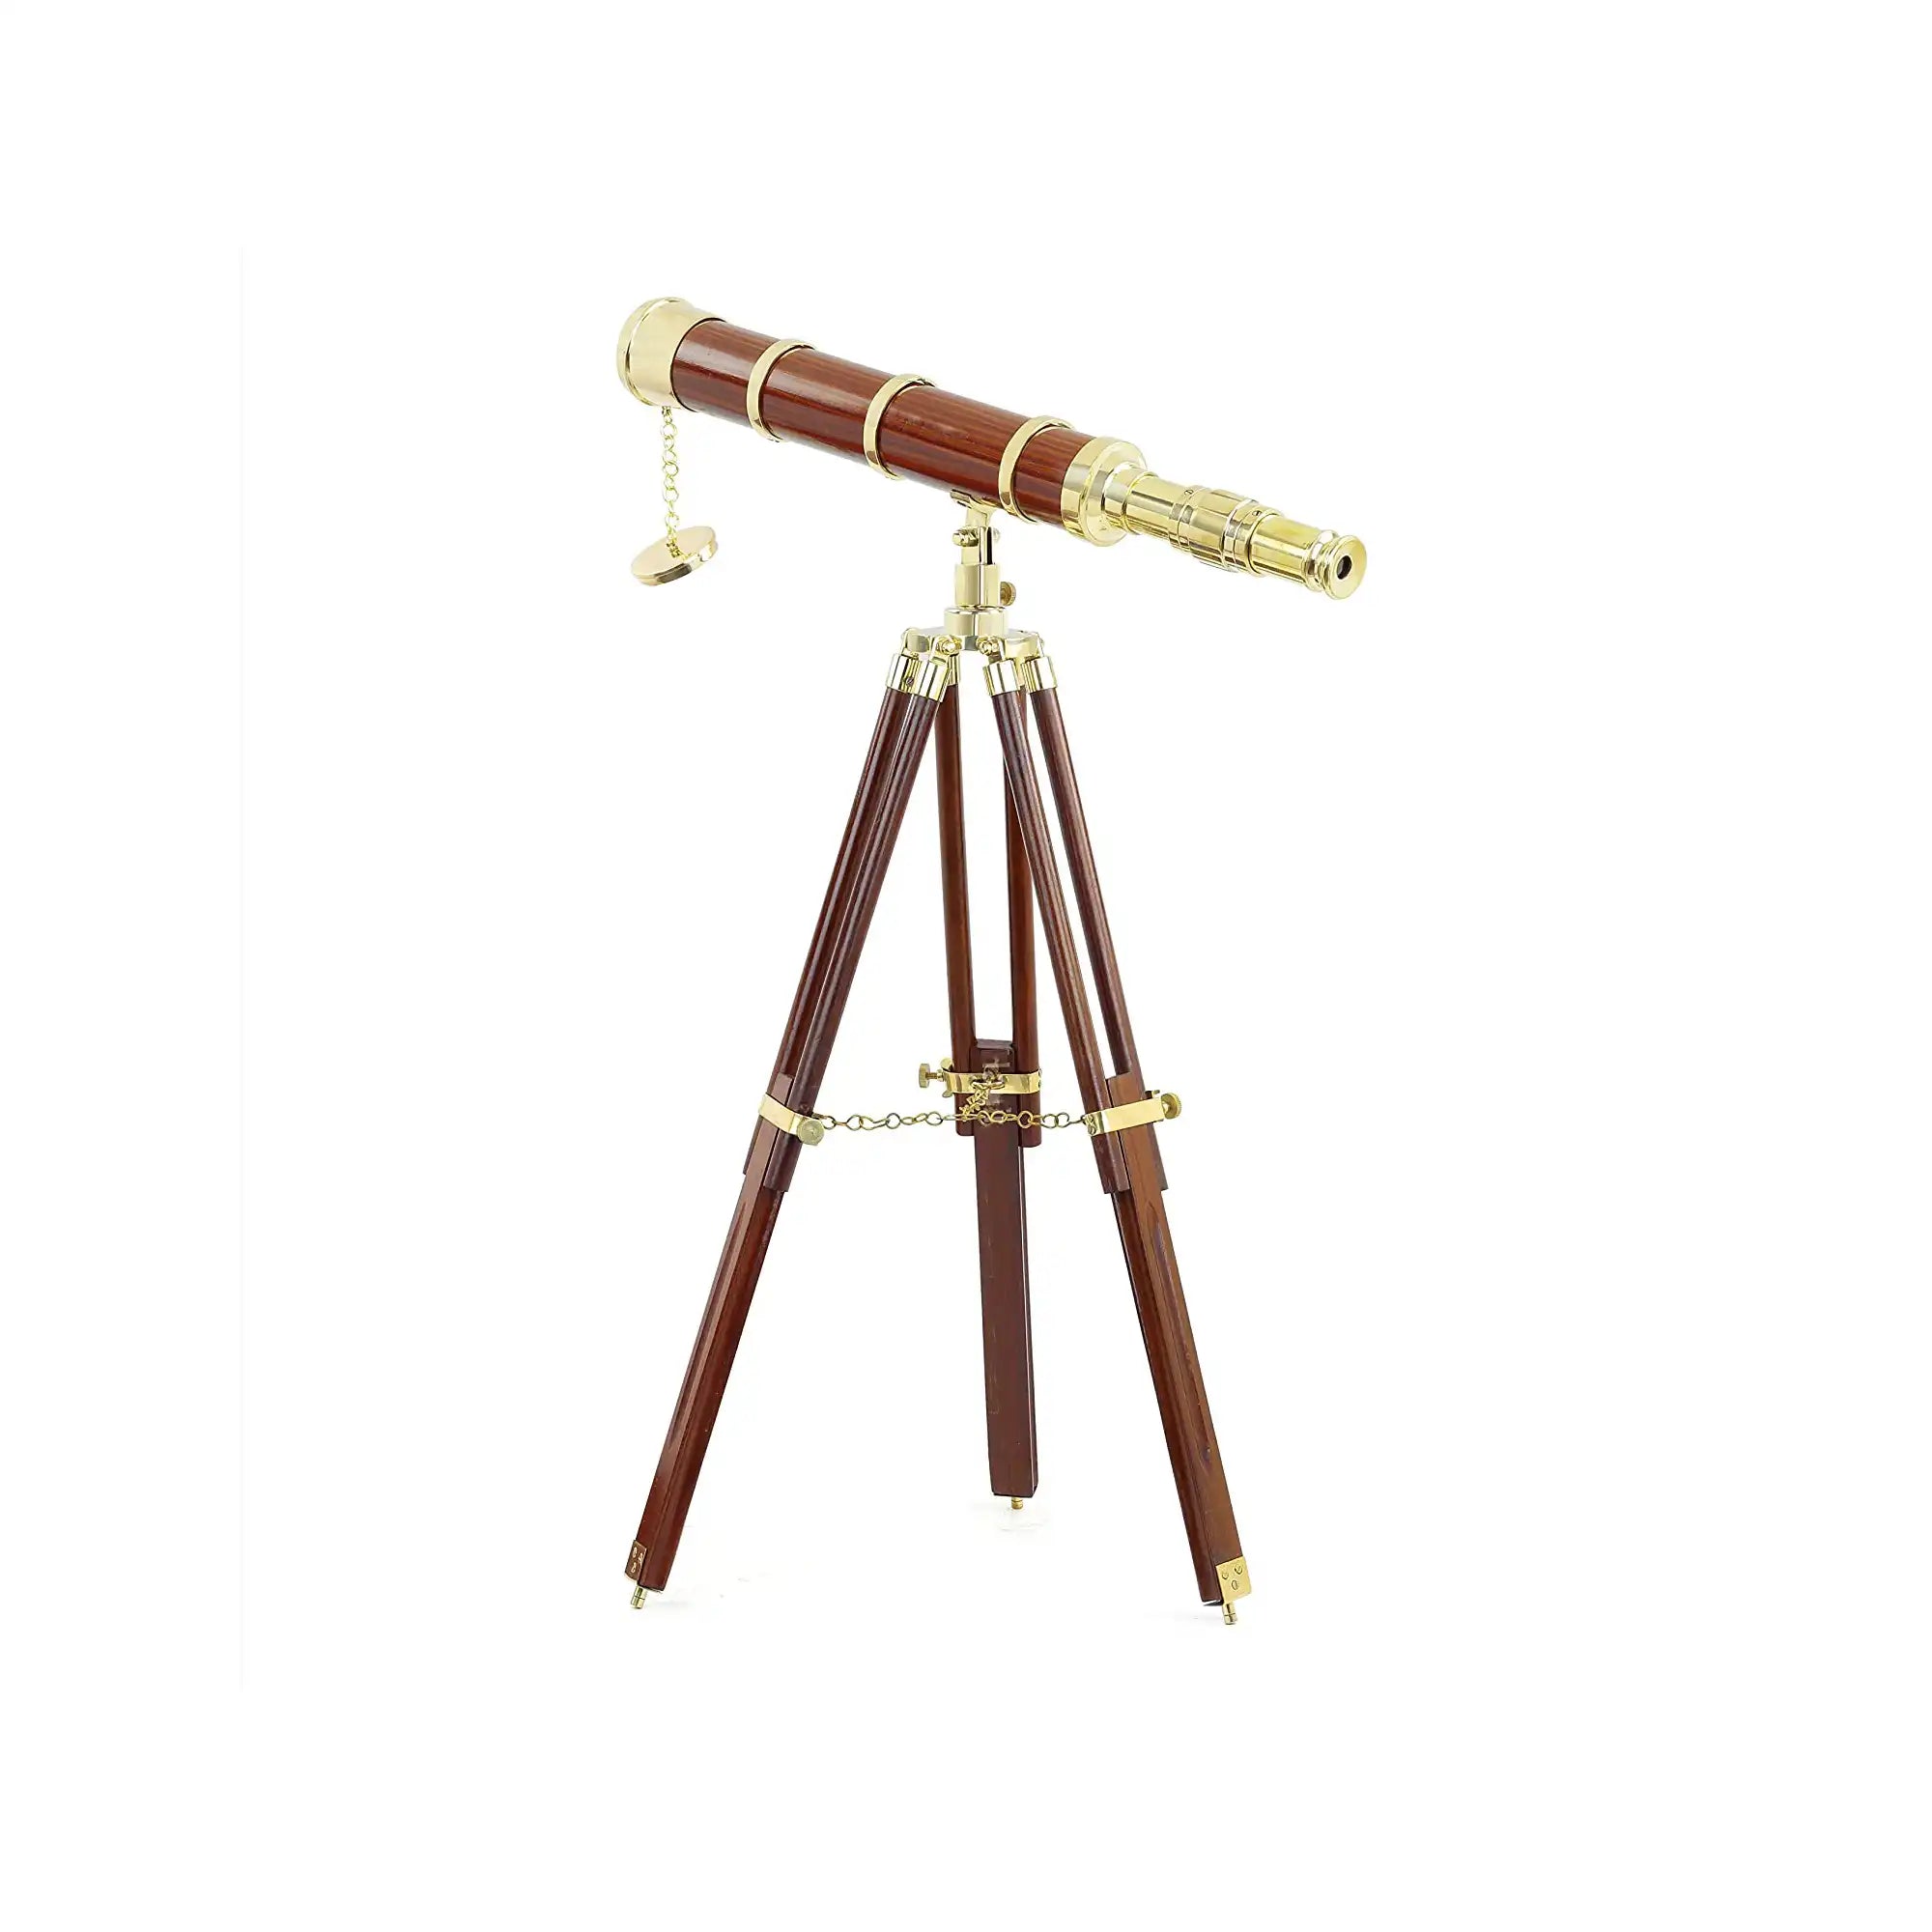 Fully Functional 16 inch Telescope with Wooden Rosewood Tripod Stand